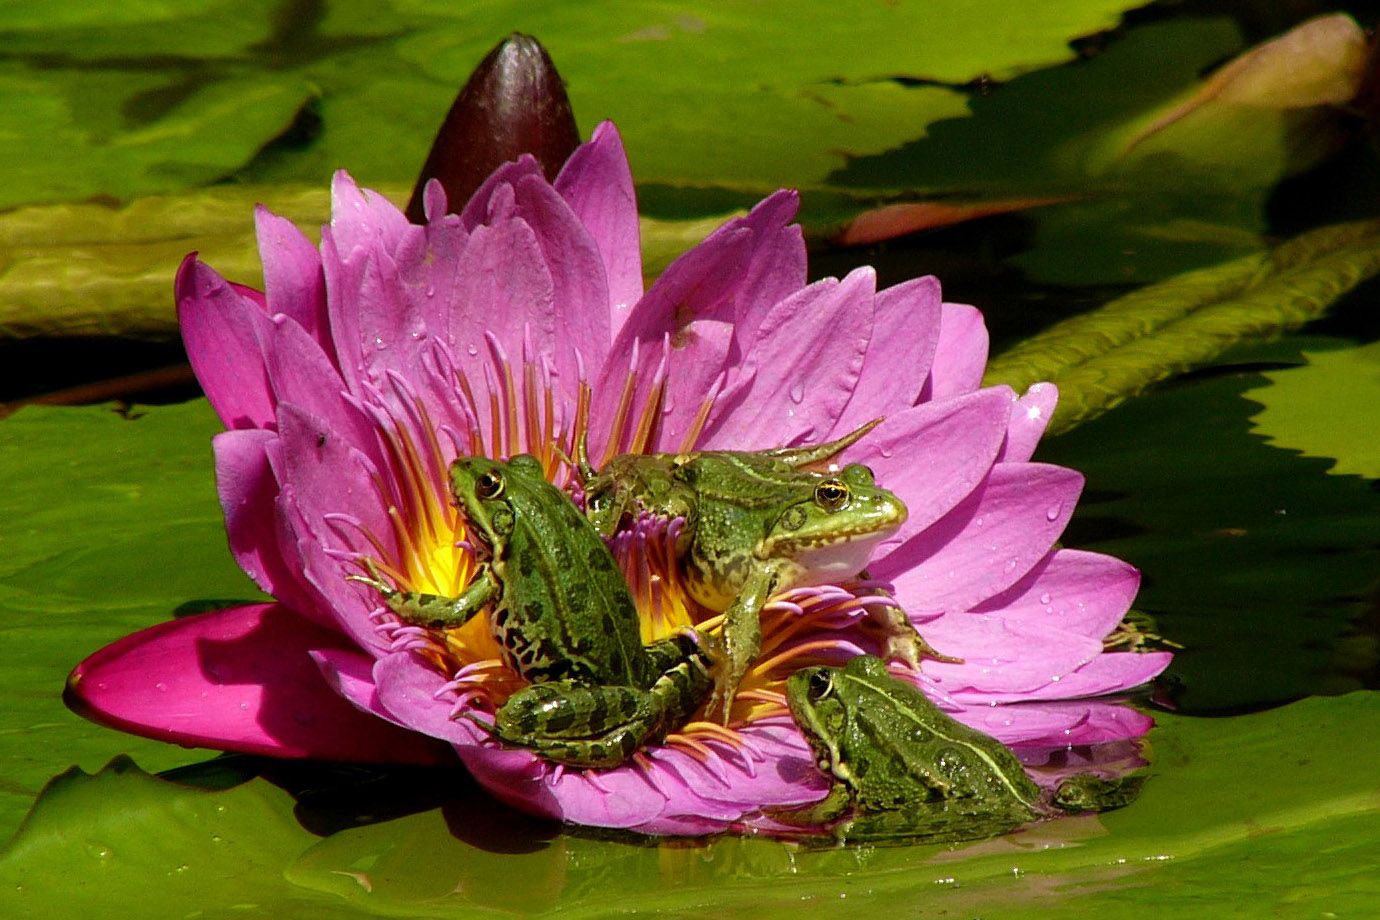 This blossom of the Water Lily seems to be very robust, that it bears the Frogs without problems.